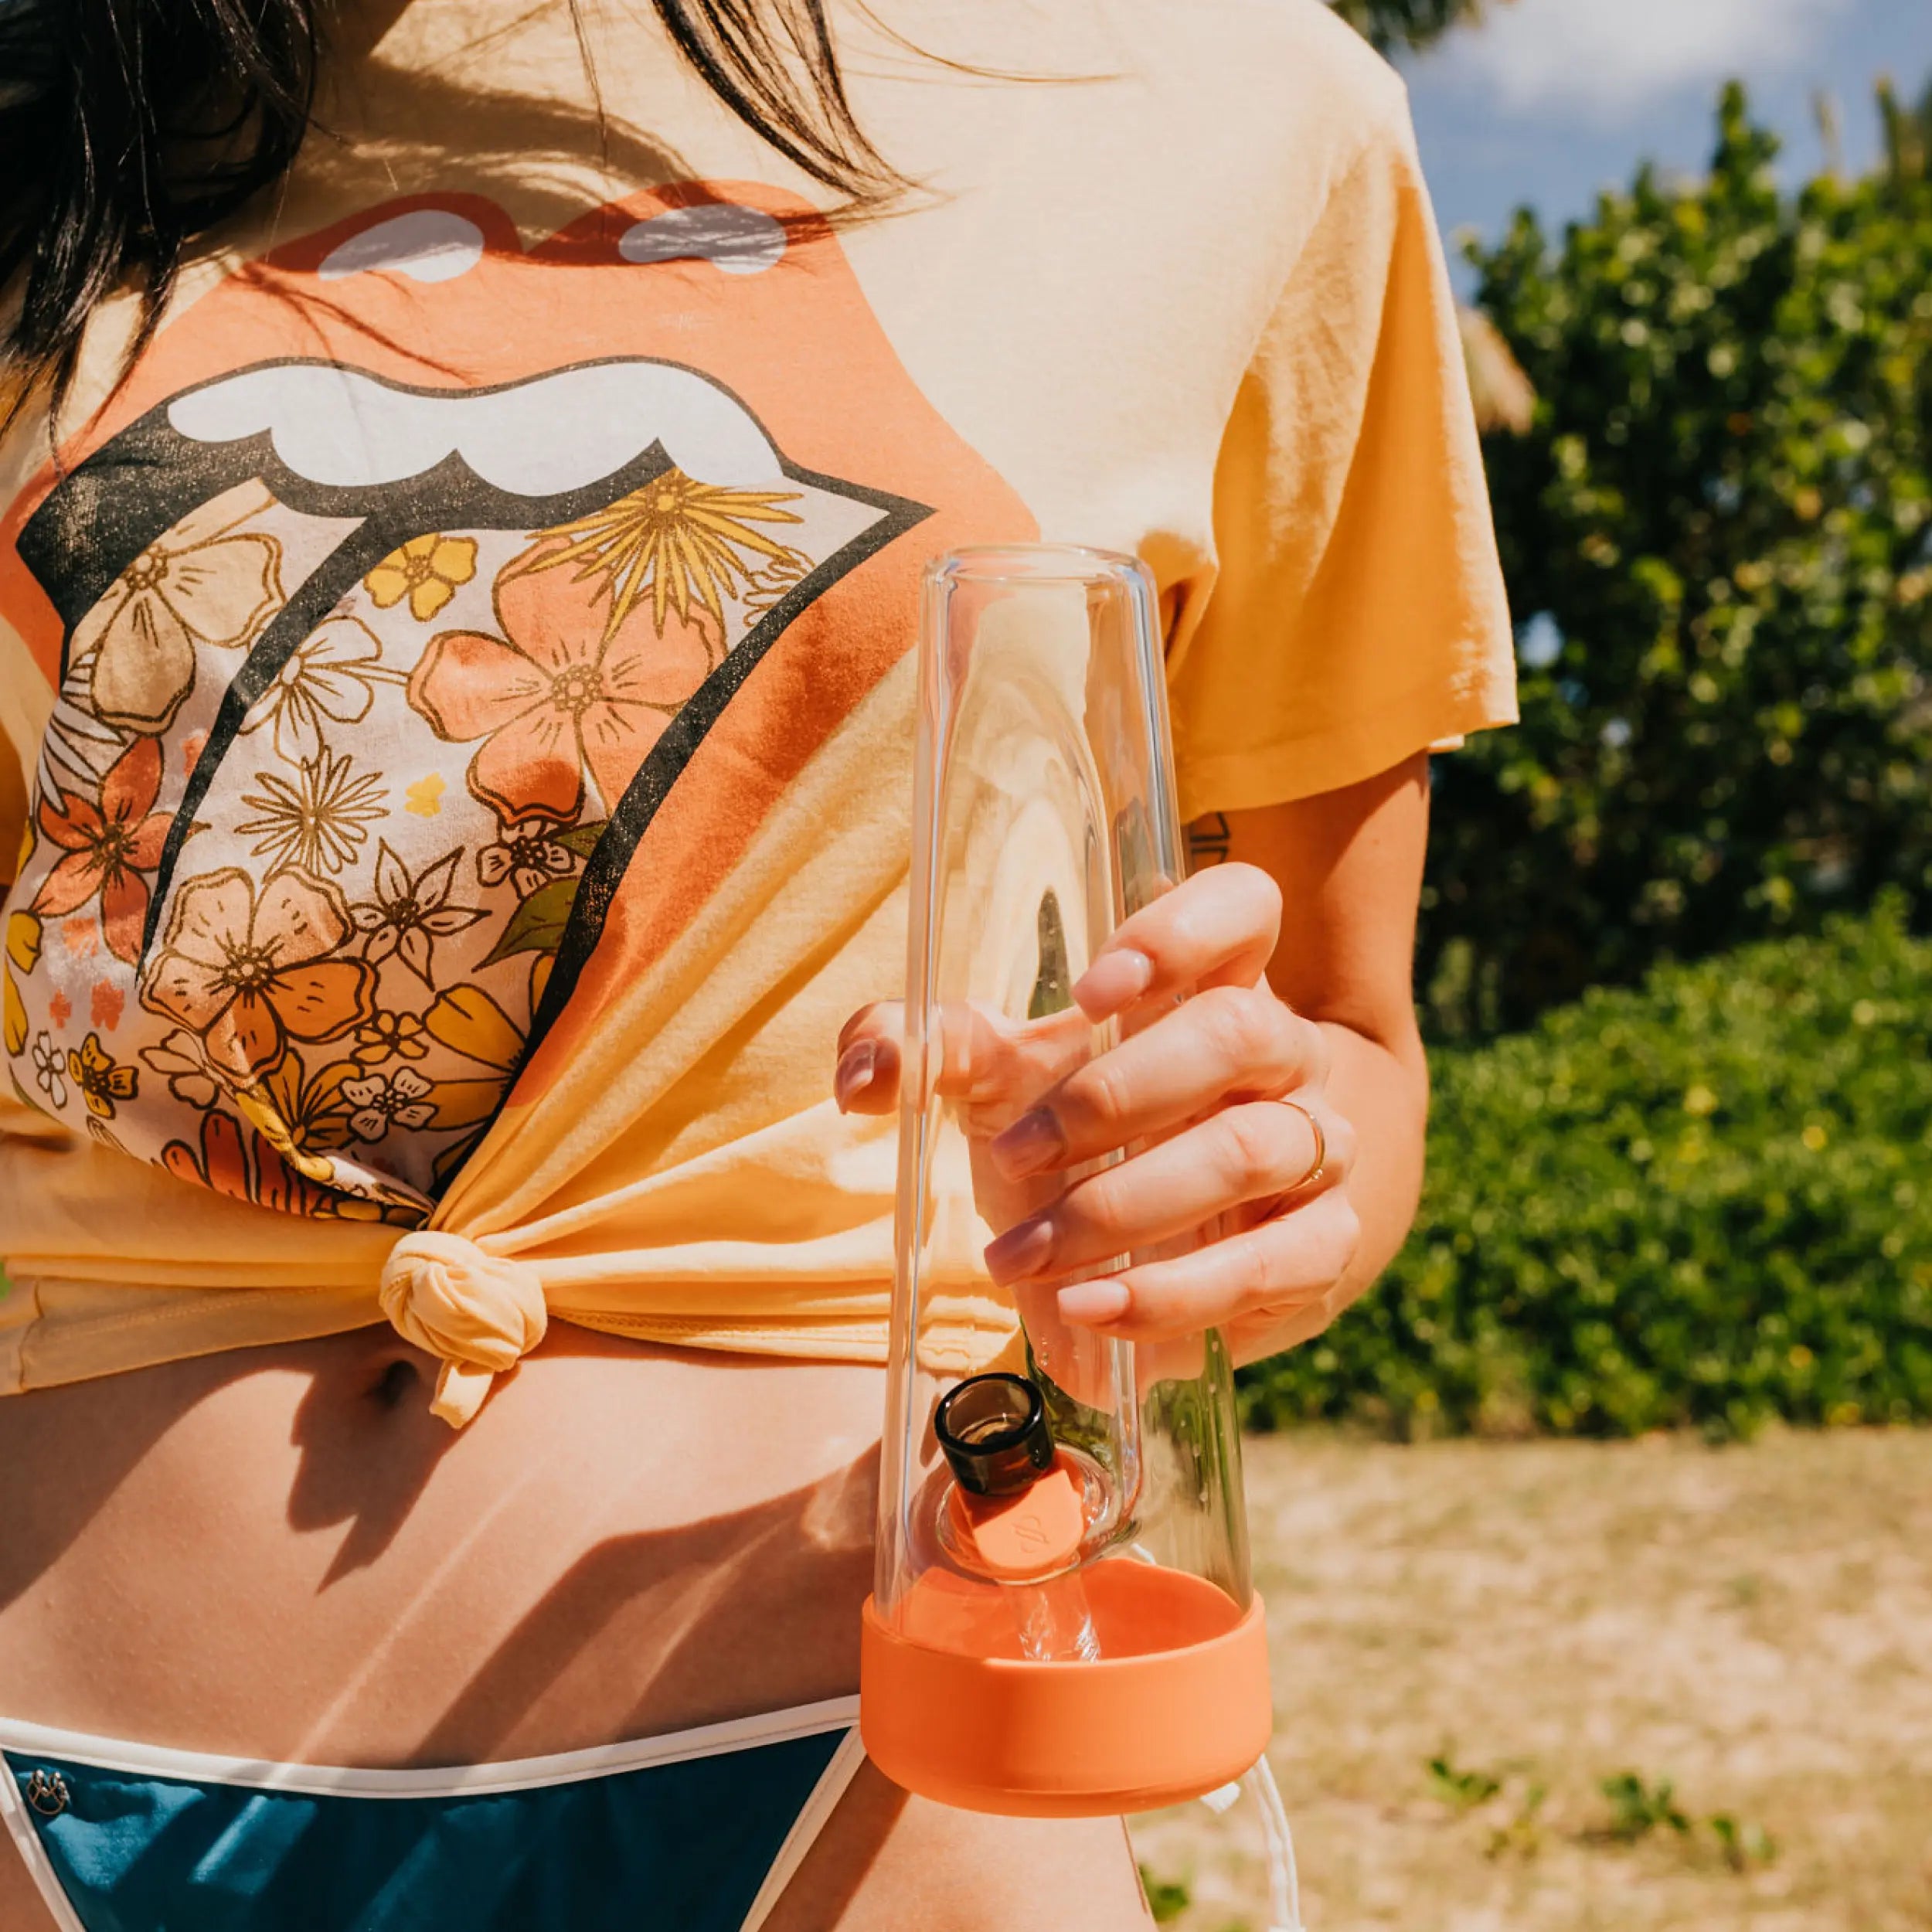 Stylish Summer Solstice Bundle with Horizon Bong, Paradise Pipe, and essential accessories from Session Goods